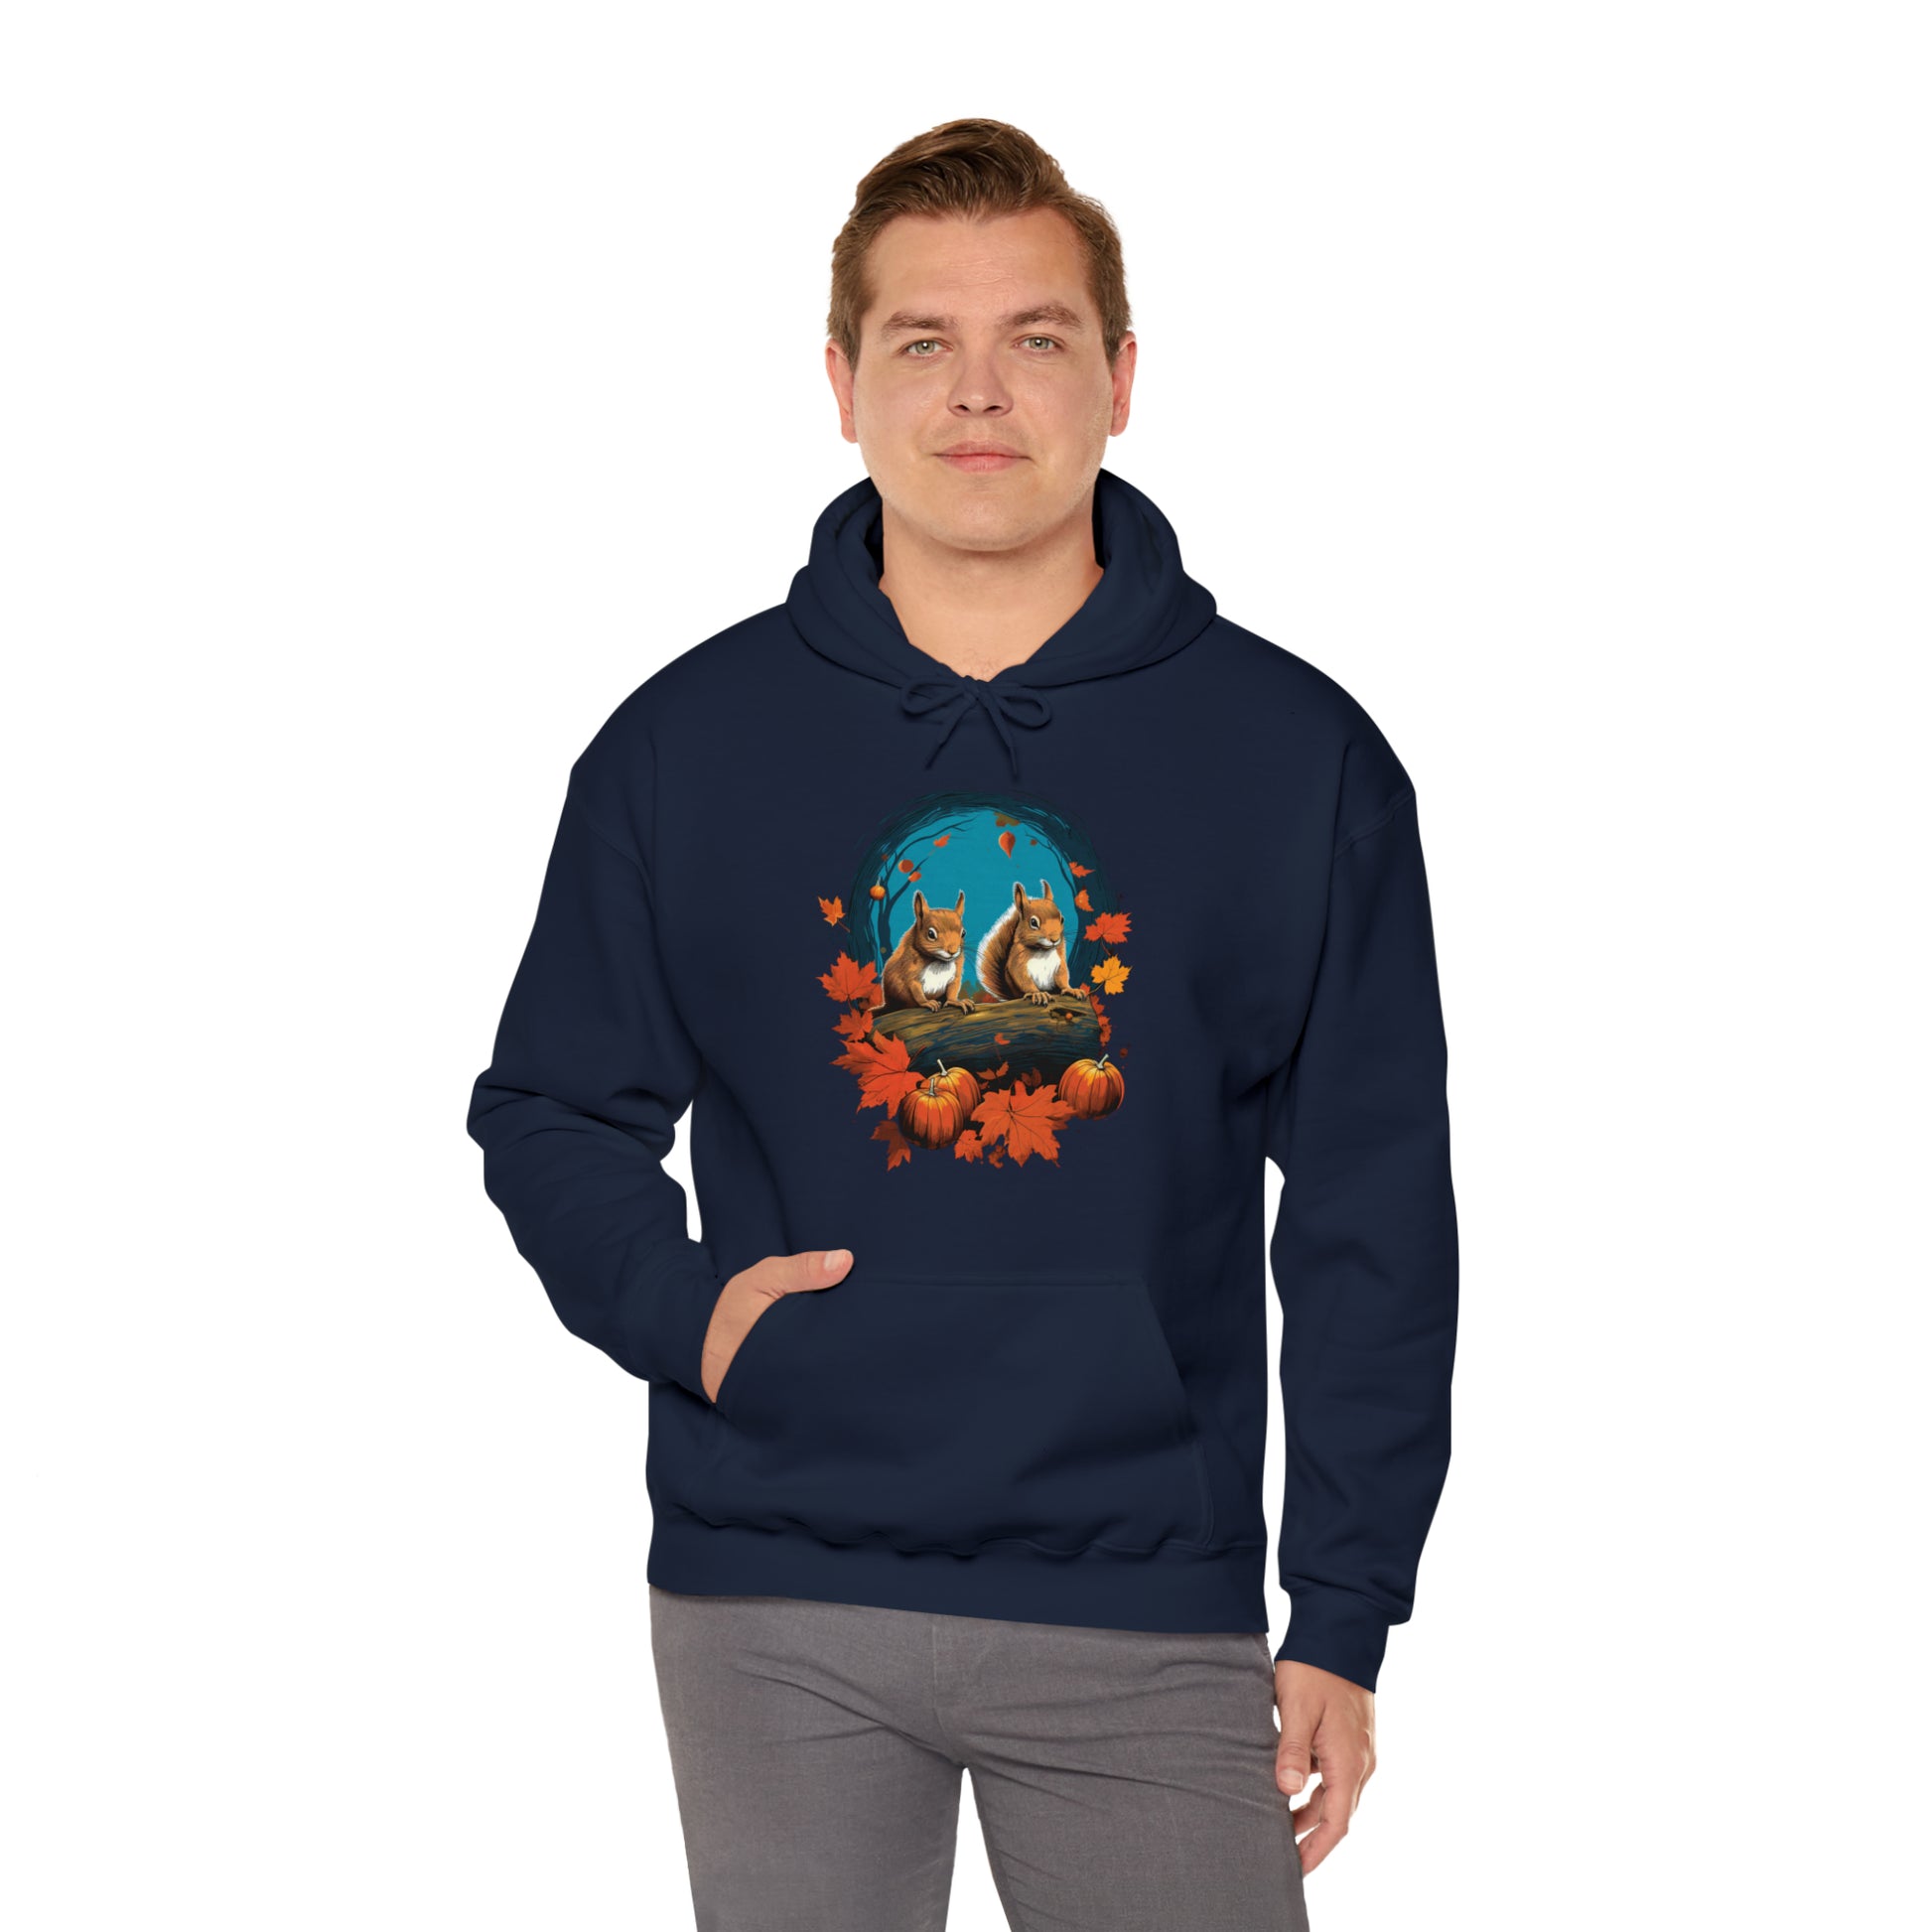 Squirrels Hoodie, Fall Autumn Leaves Pumpkins Animals Pullover Men Women Adult Aesthetic Graphic Cotton Hooded Sweatshirt Pockets Starcove Fashion